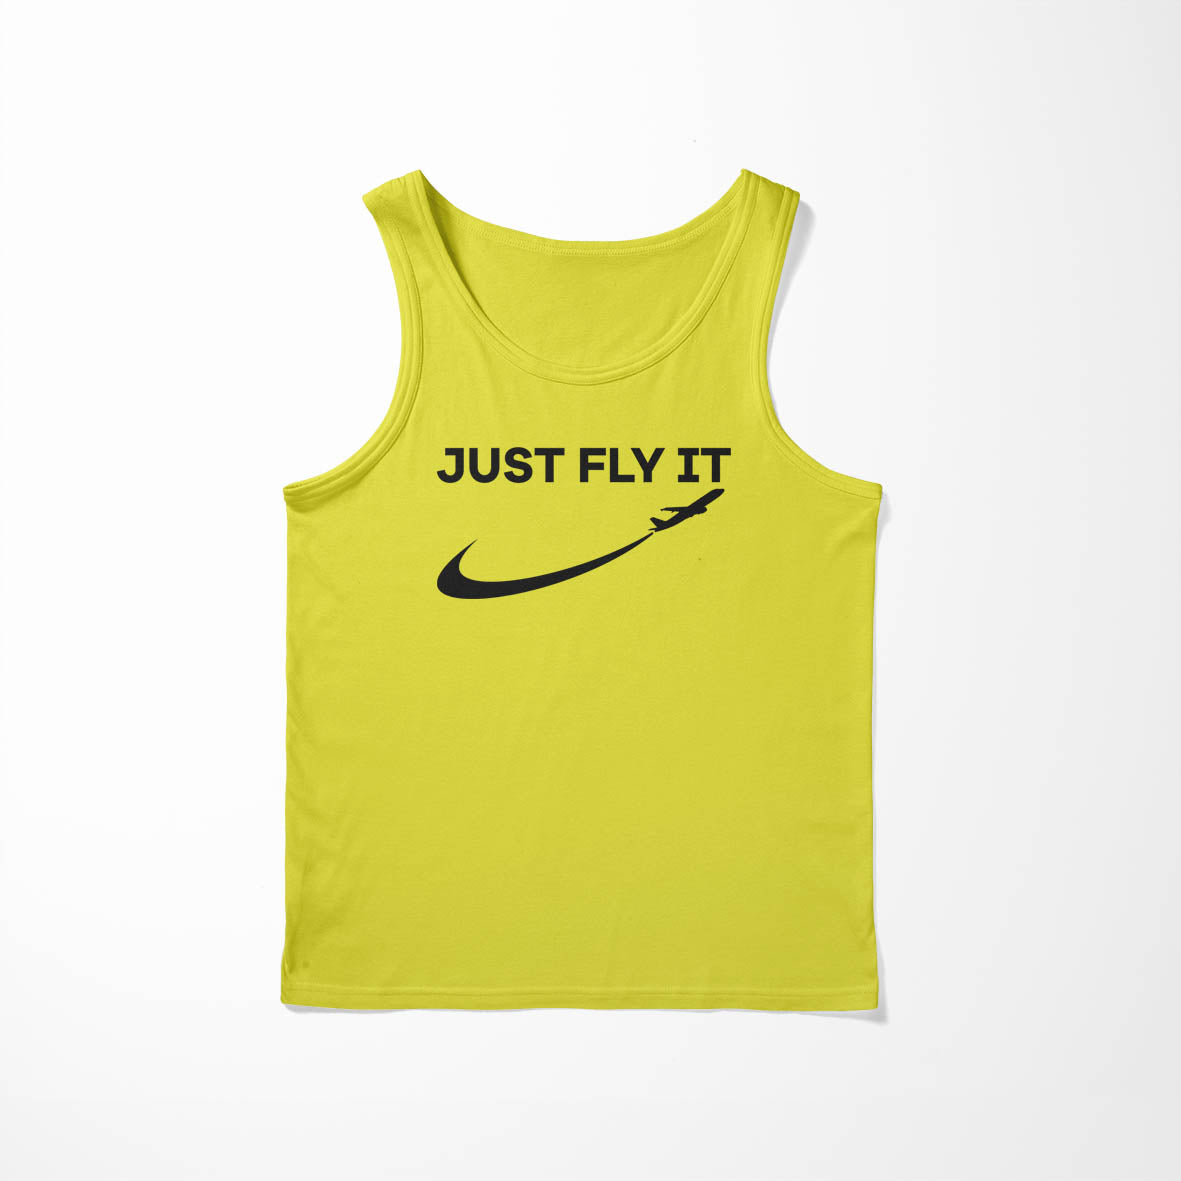 Just Fly It 2 Designed Tank Tops